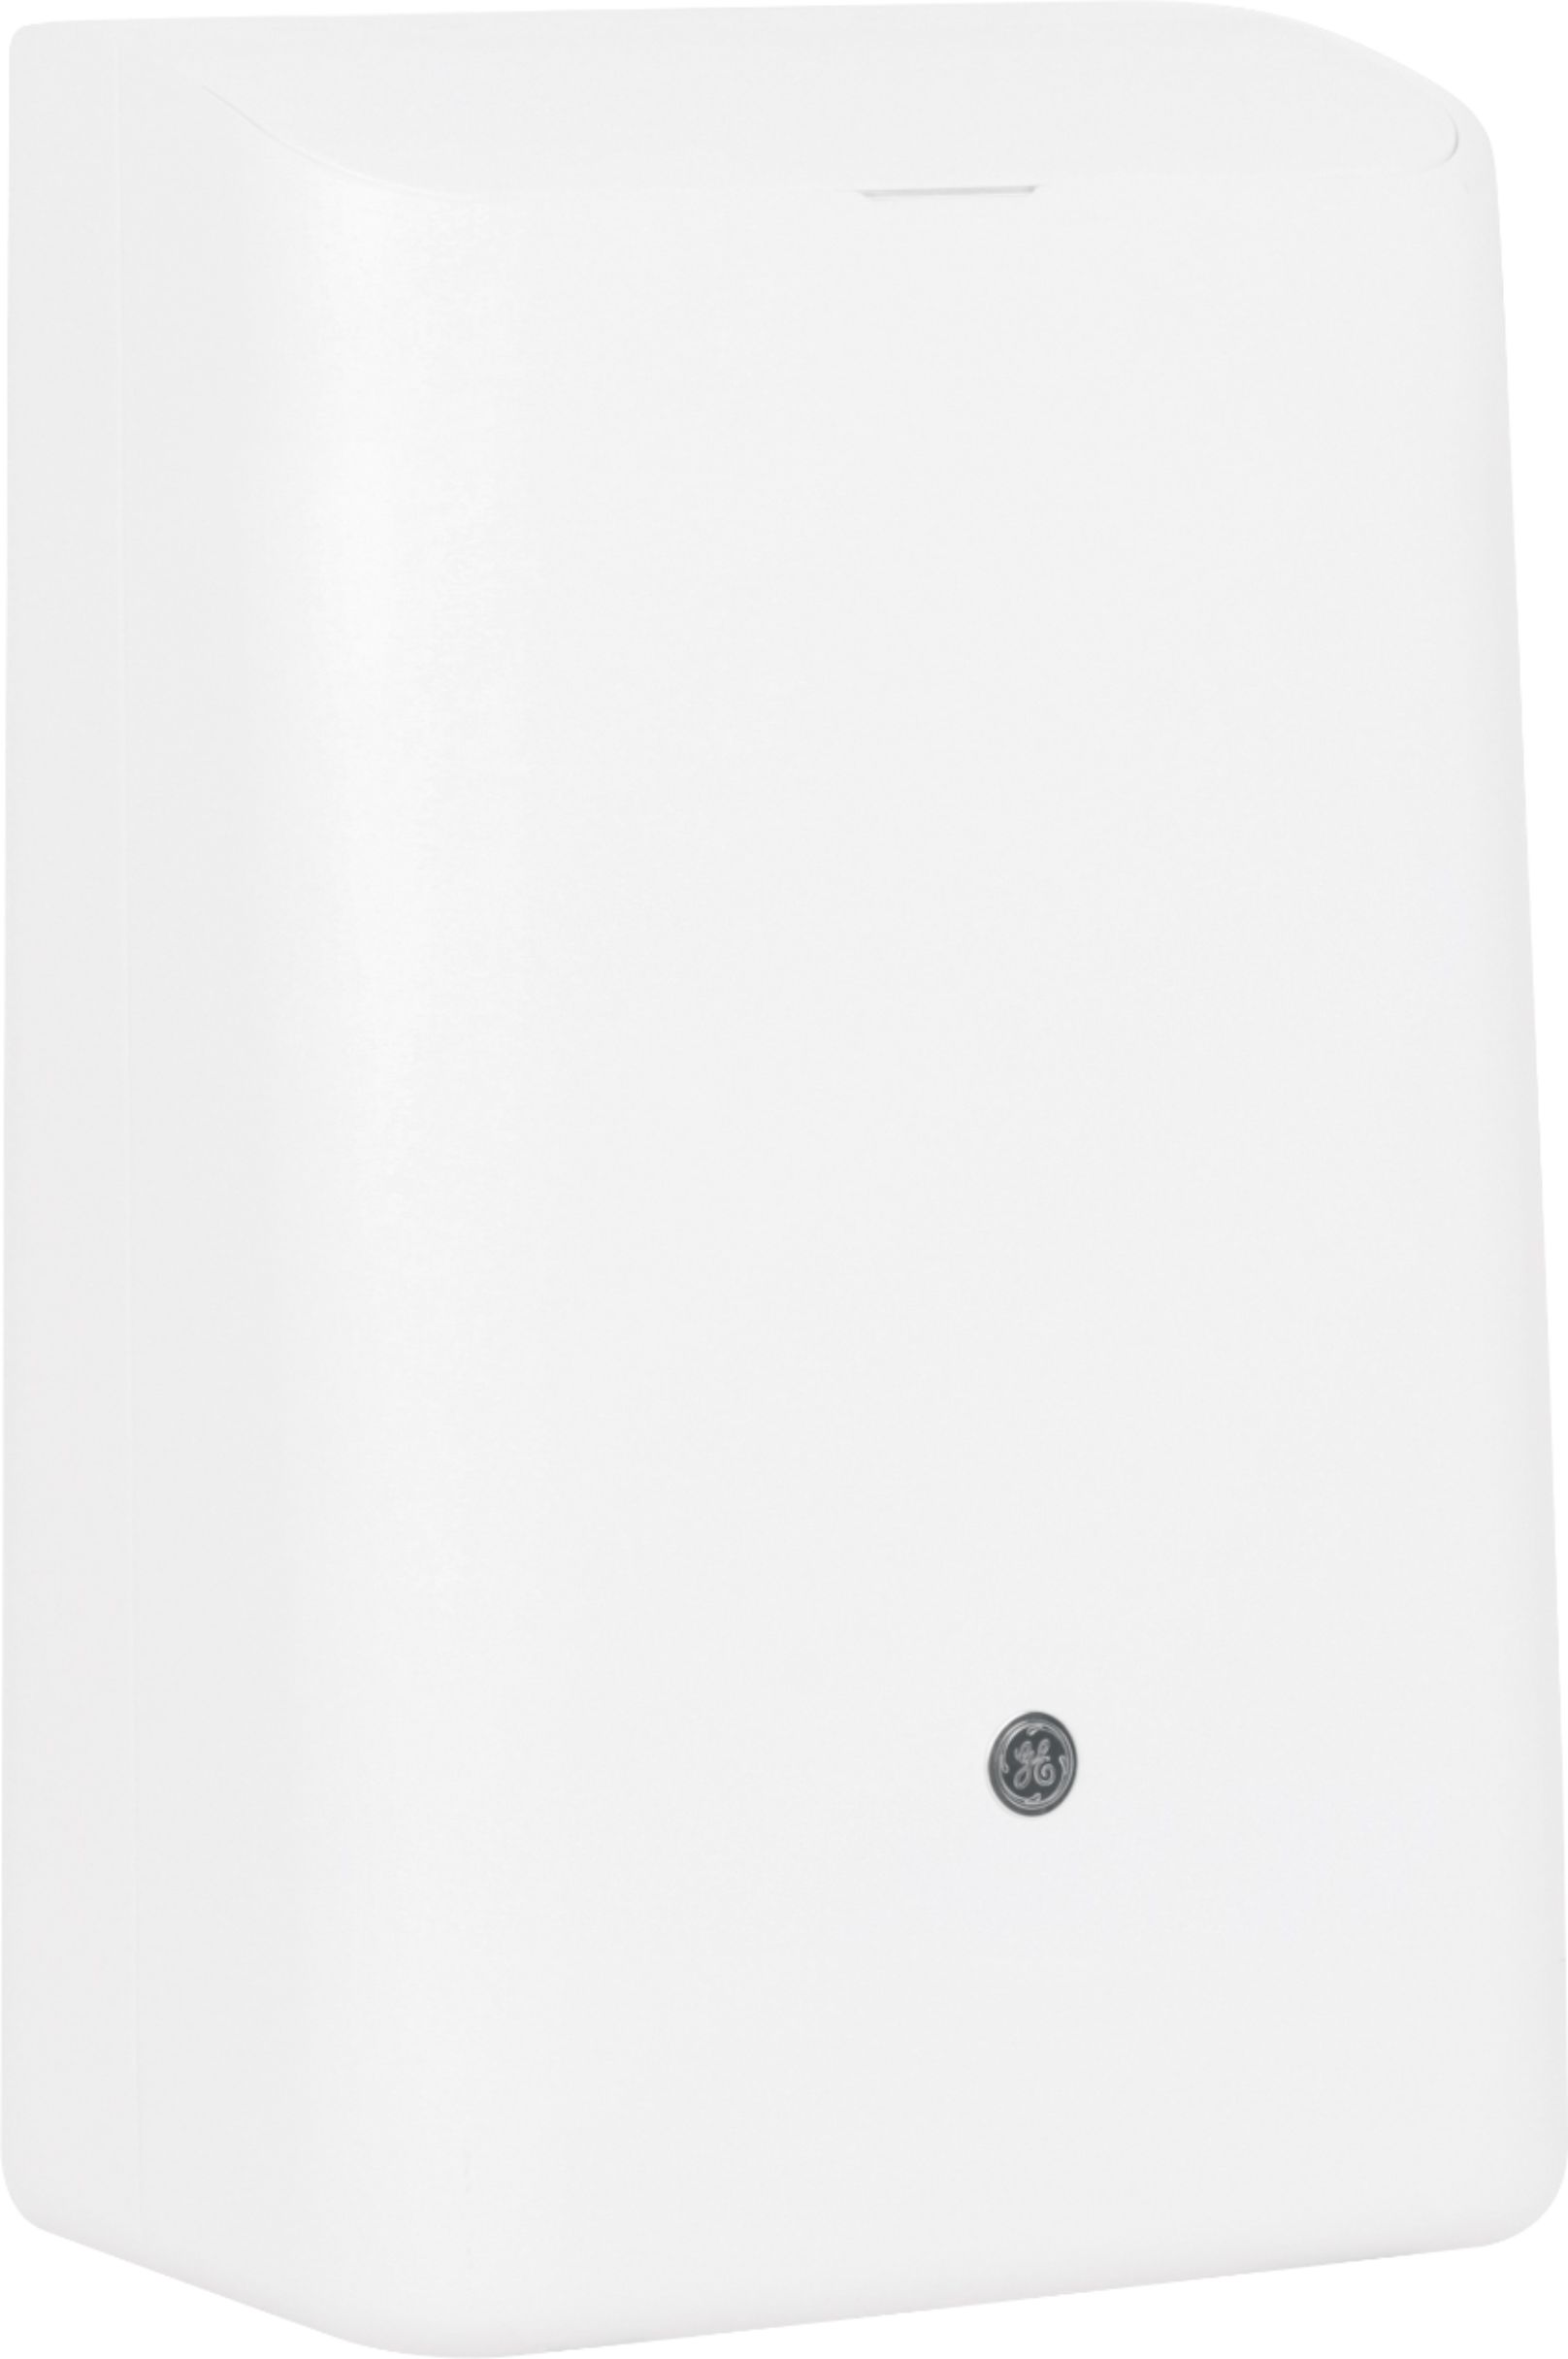 Angle View: GE - 250 Sq. Ft. Portable Air Conditioner - White